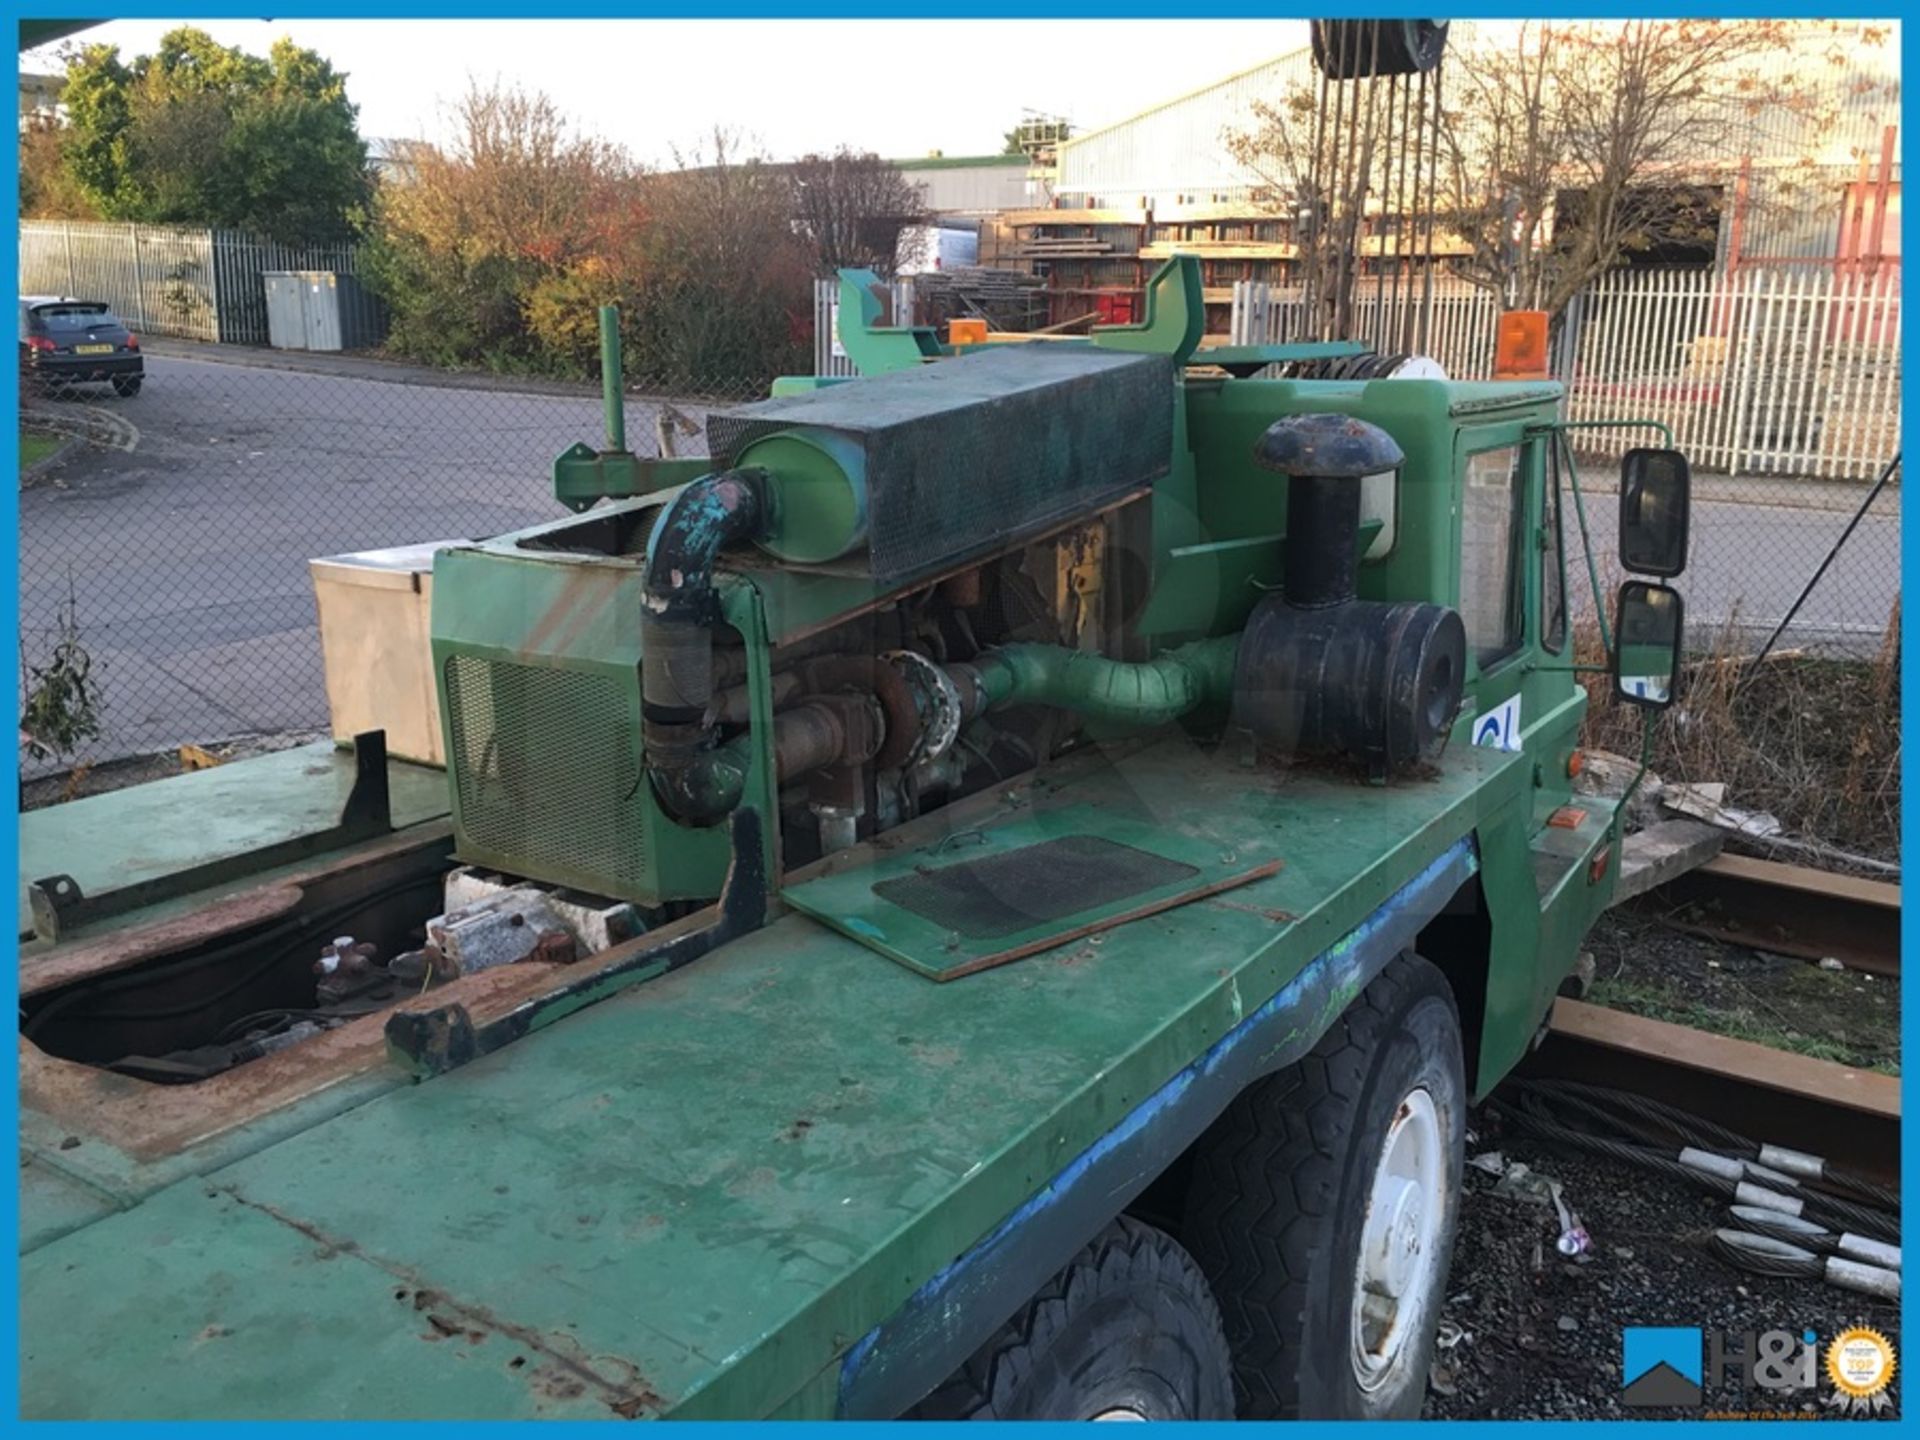 Grove 1985 YOM, 50 tonne mobile yard crane. The crane has main engine drive gearbox issues and - Image 14 of 16